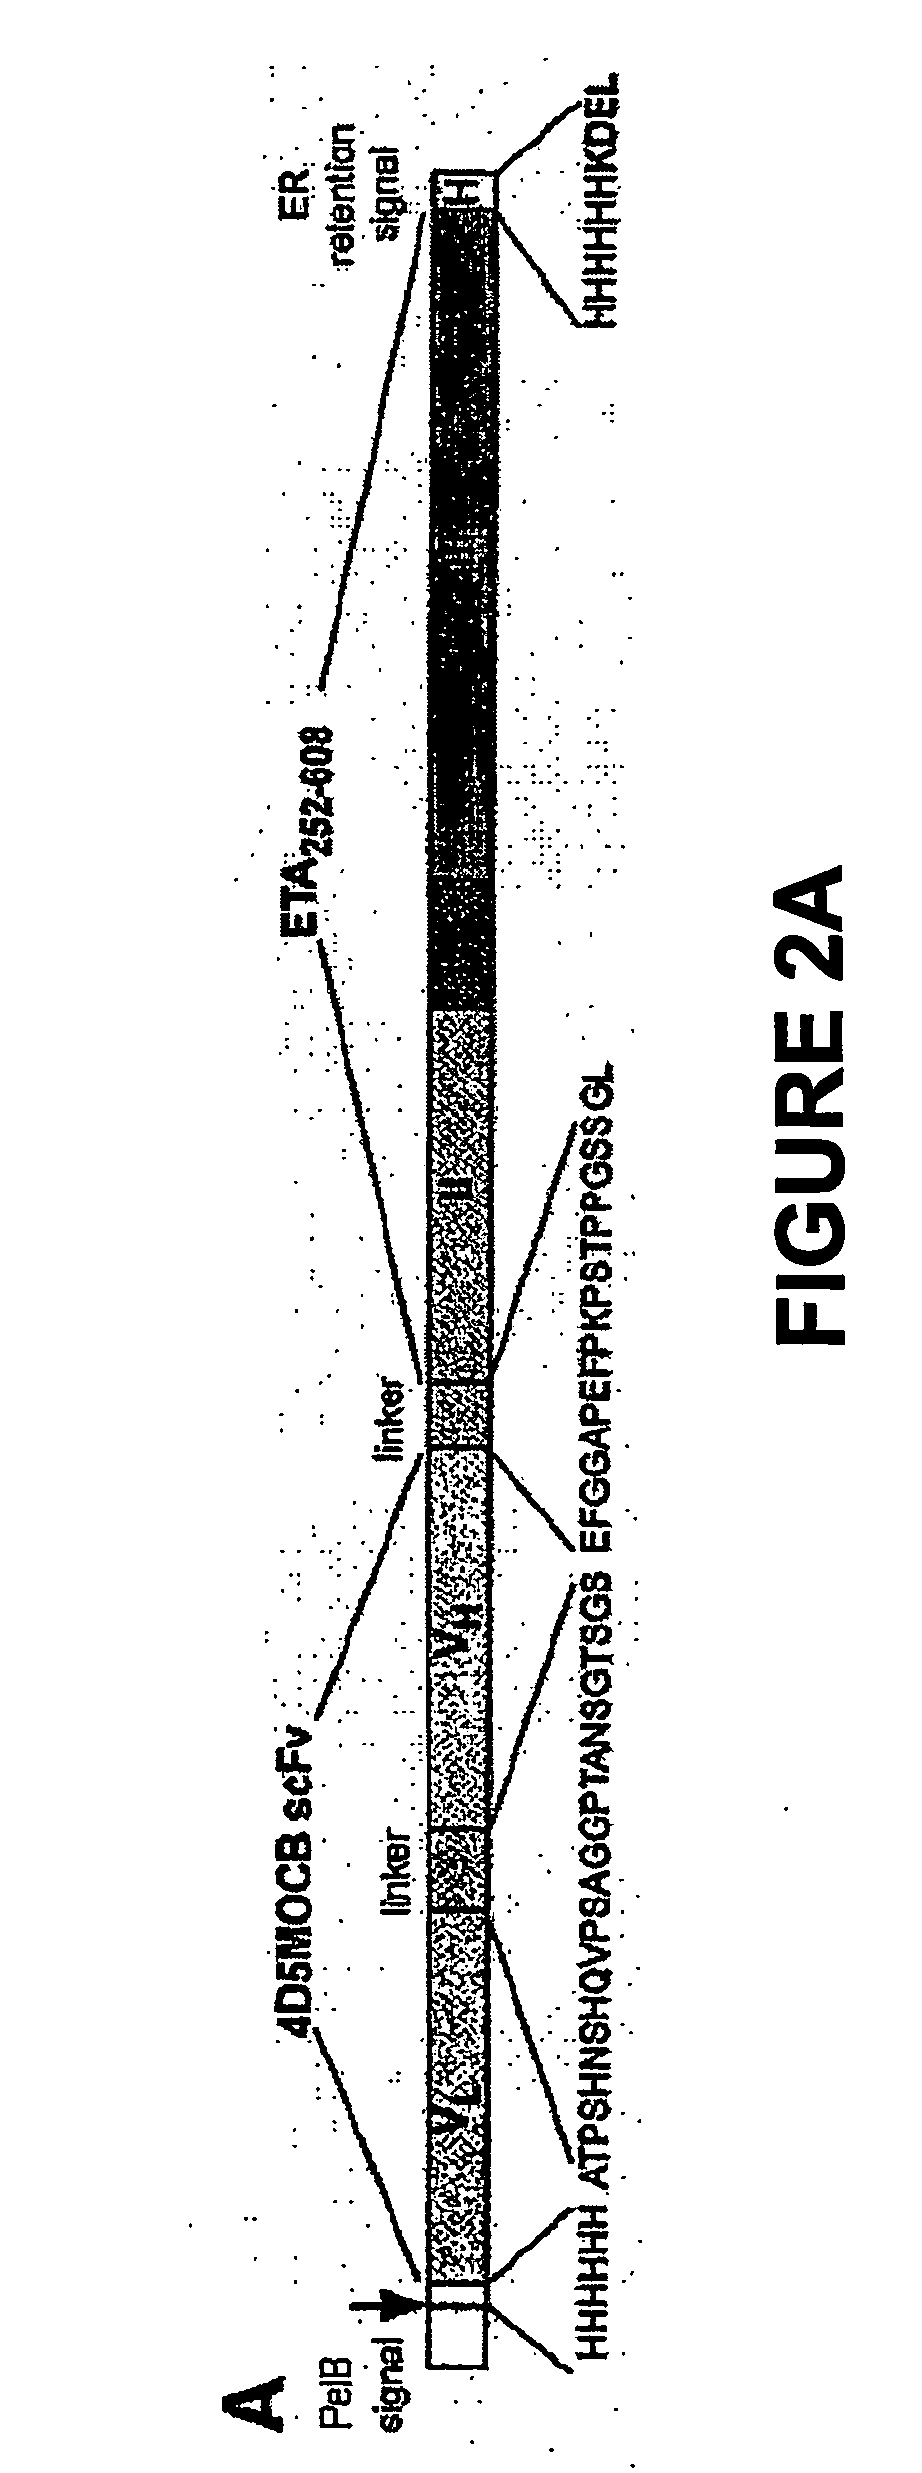 Methods for treating cancer using an immunotoxin